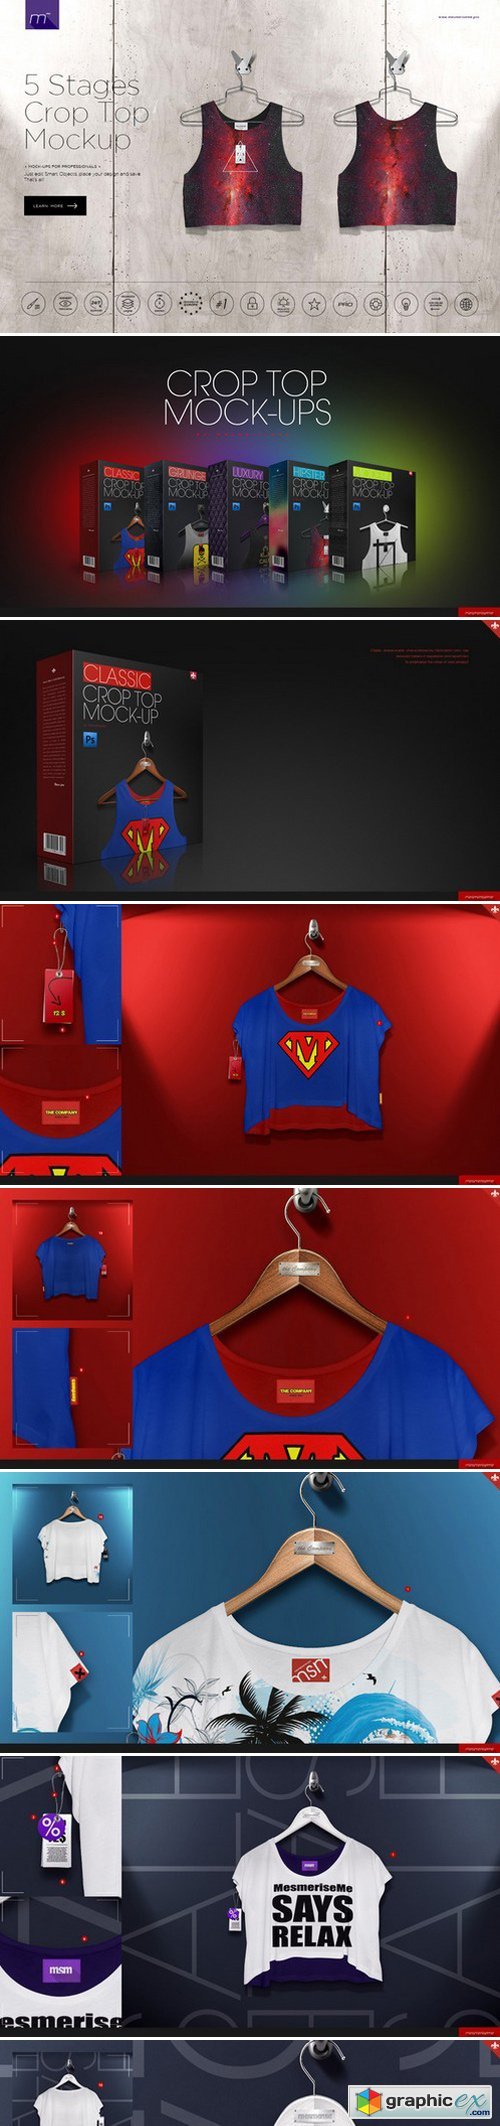 Crop Top On 5 Stages Mock-up 